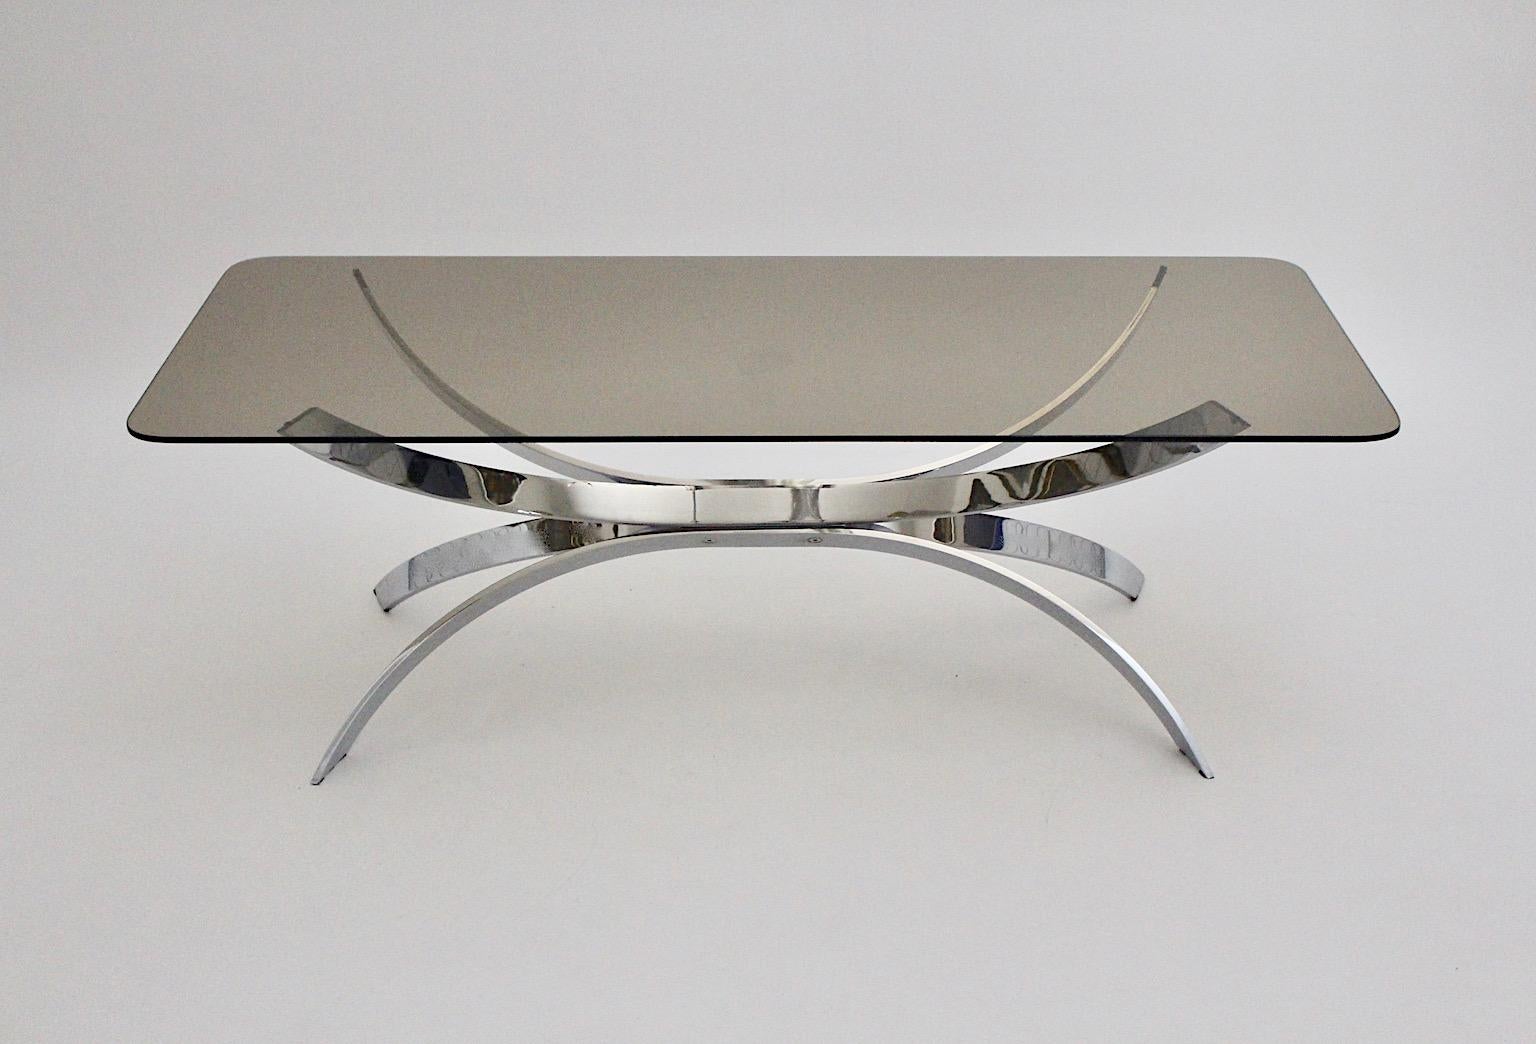 20th Century Chromed Vintage Coffee Table or Sofa Table with Smoked Glass Top, 1970s For Sale